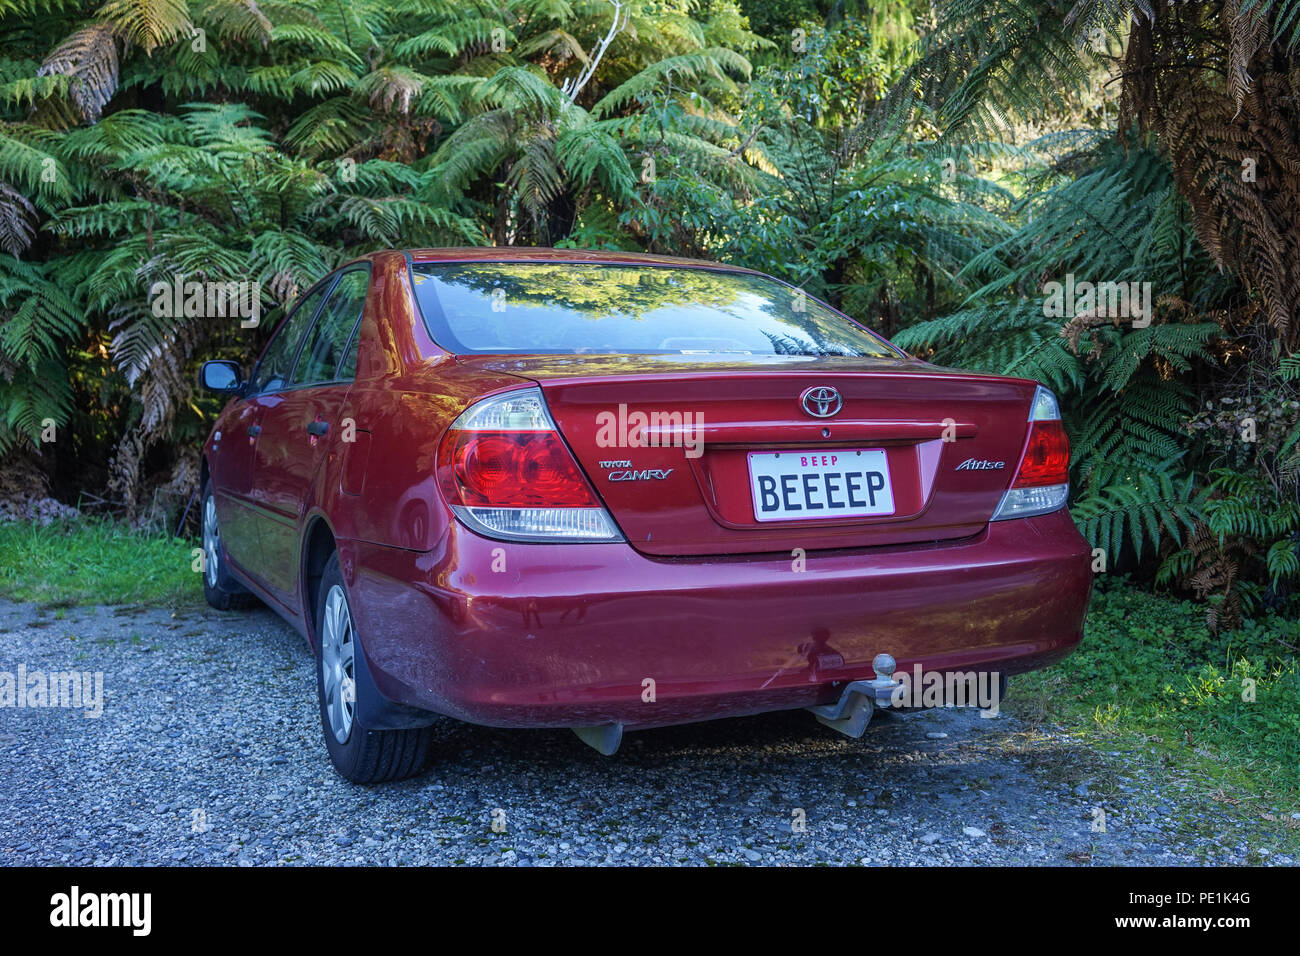 Haast, New Zealand - Apr 30, 2015. Private car Toyota Camry parking on street in Haast, New Zealand. Stock Photo